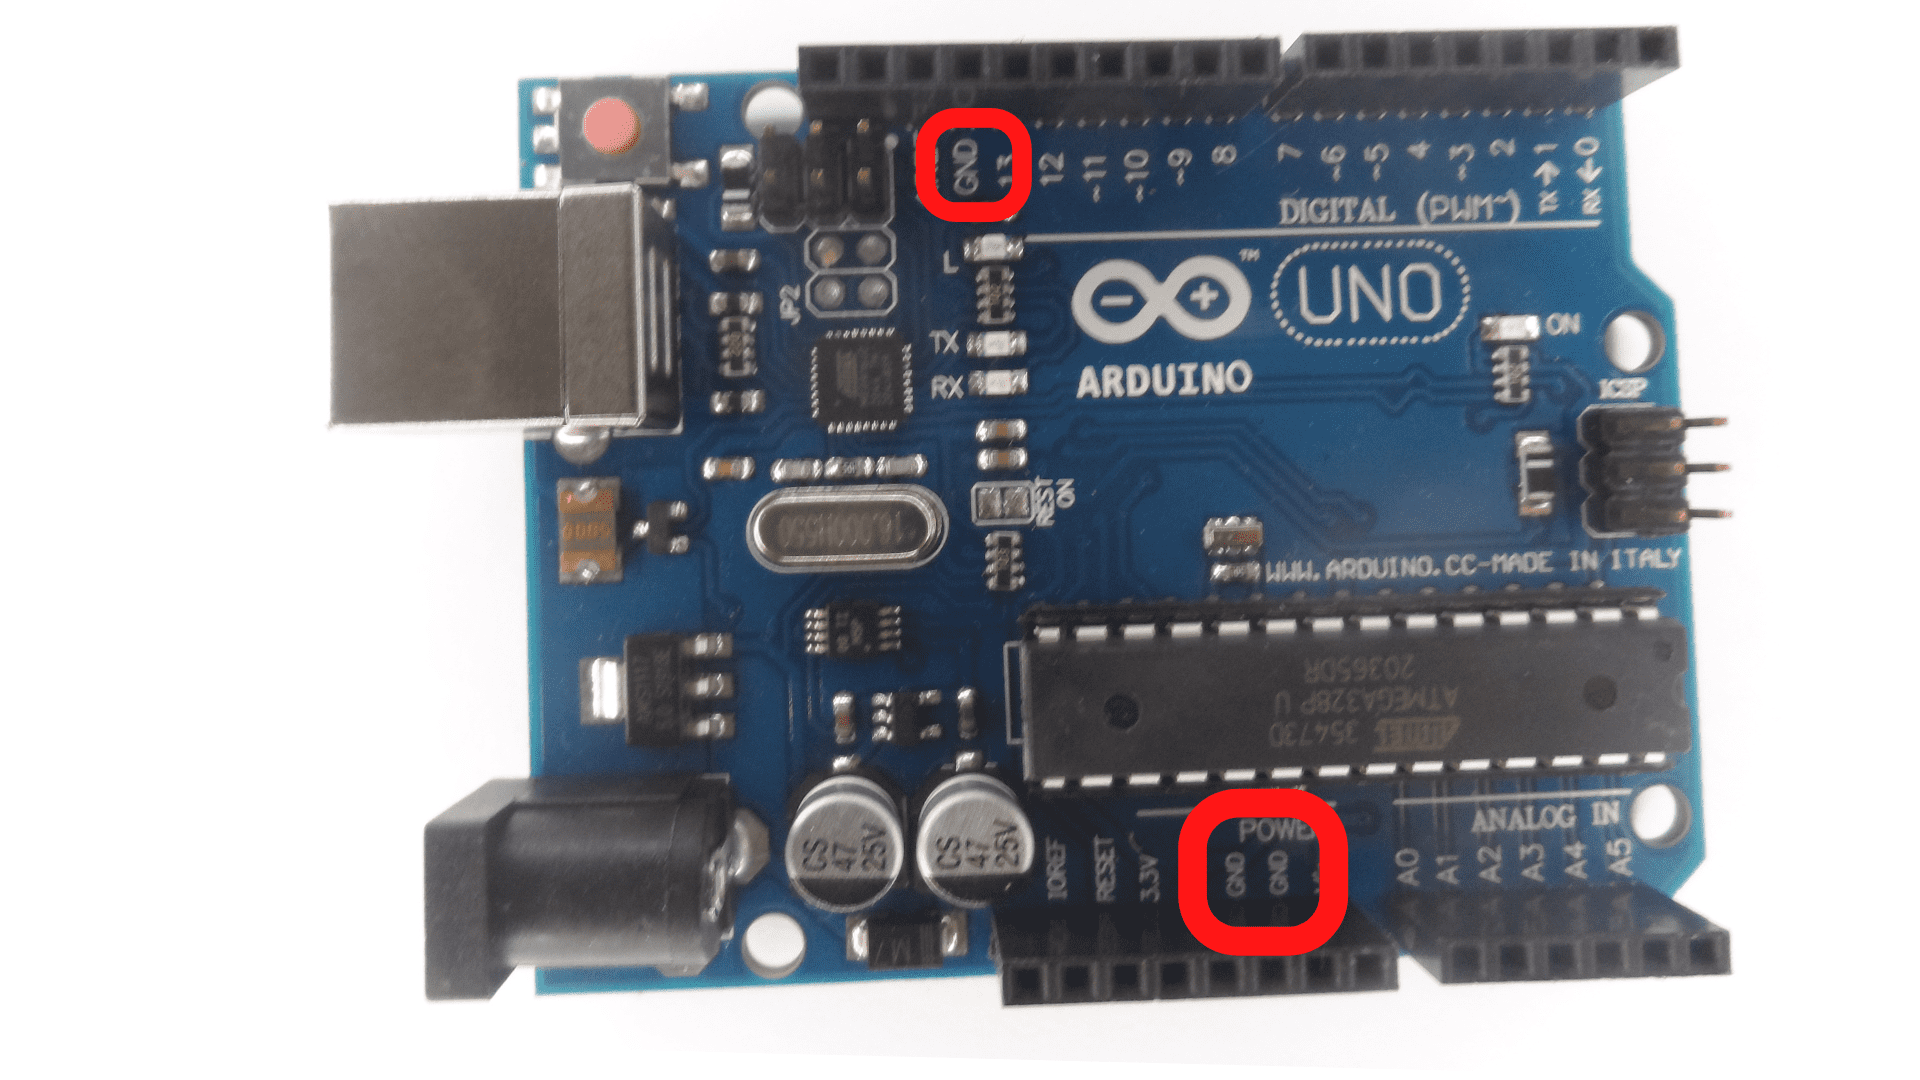 The pins on an Arduino referred to ground